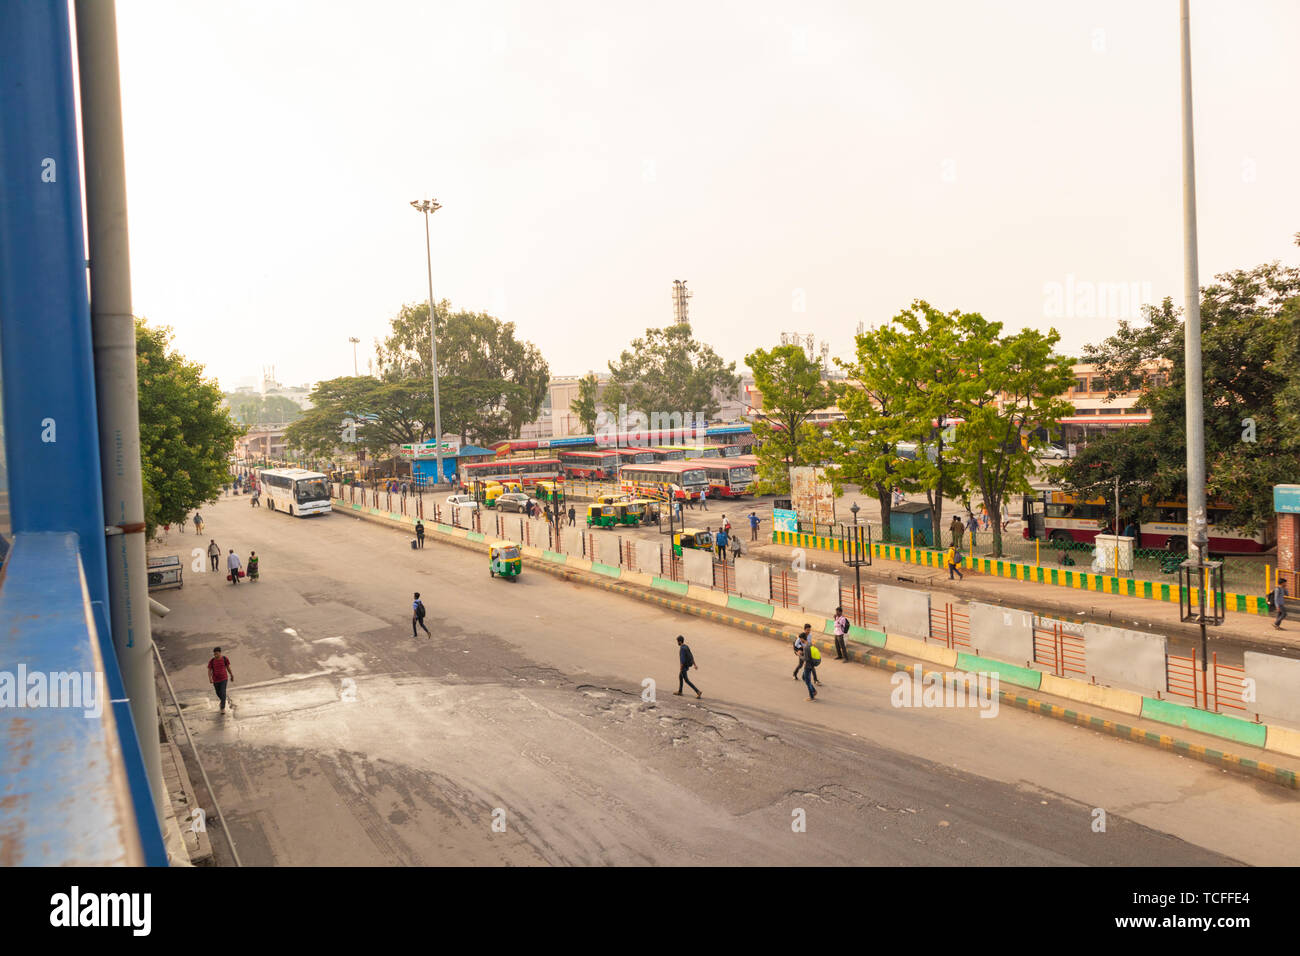 BANGALORE INDIA June 3, 2019:Buses in the Kempegowda Bus Station known as Majestic during morning time Stock Photo